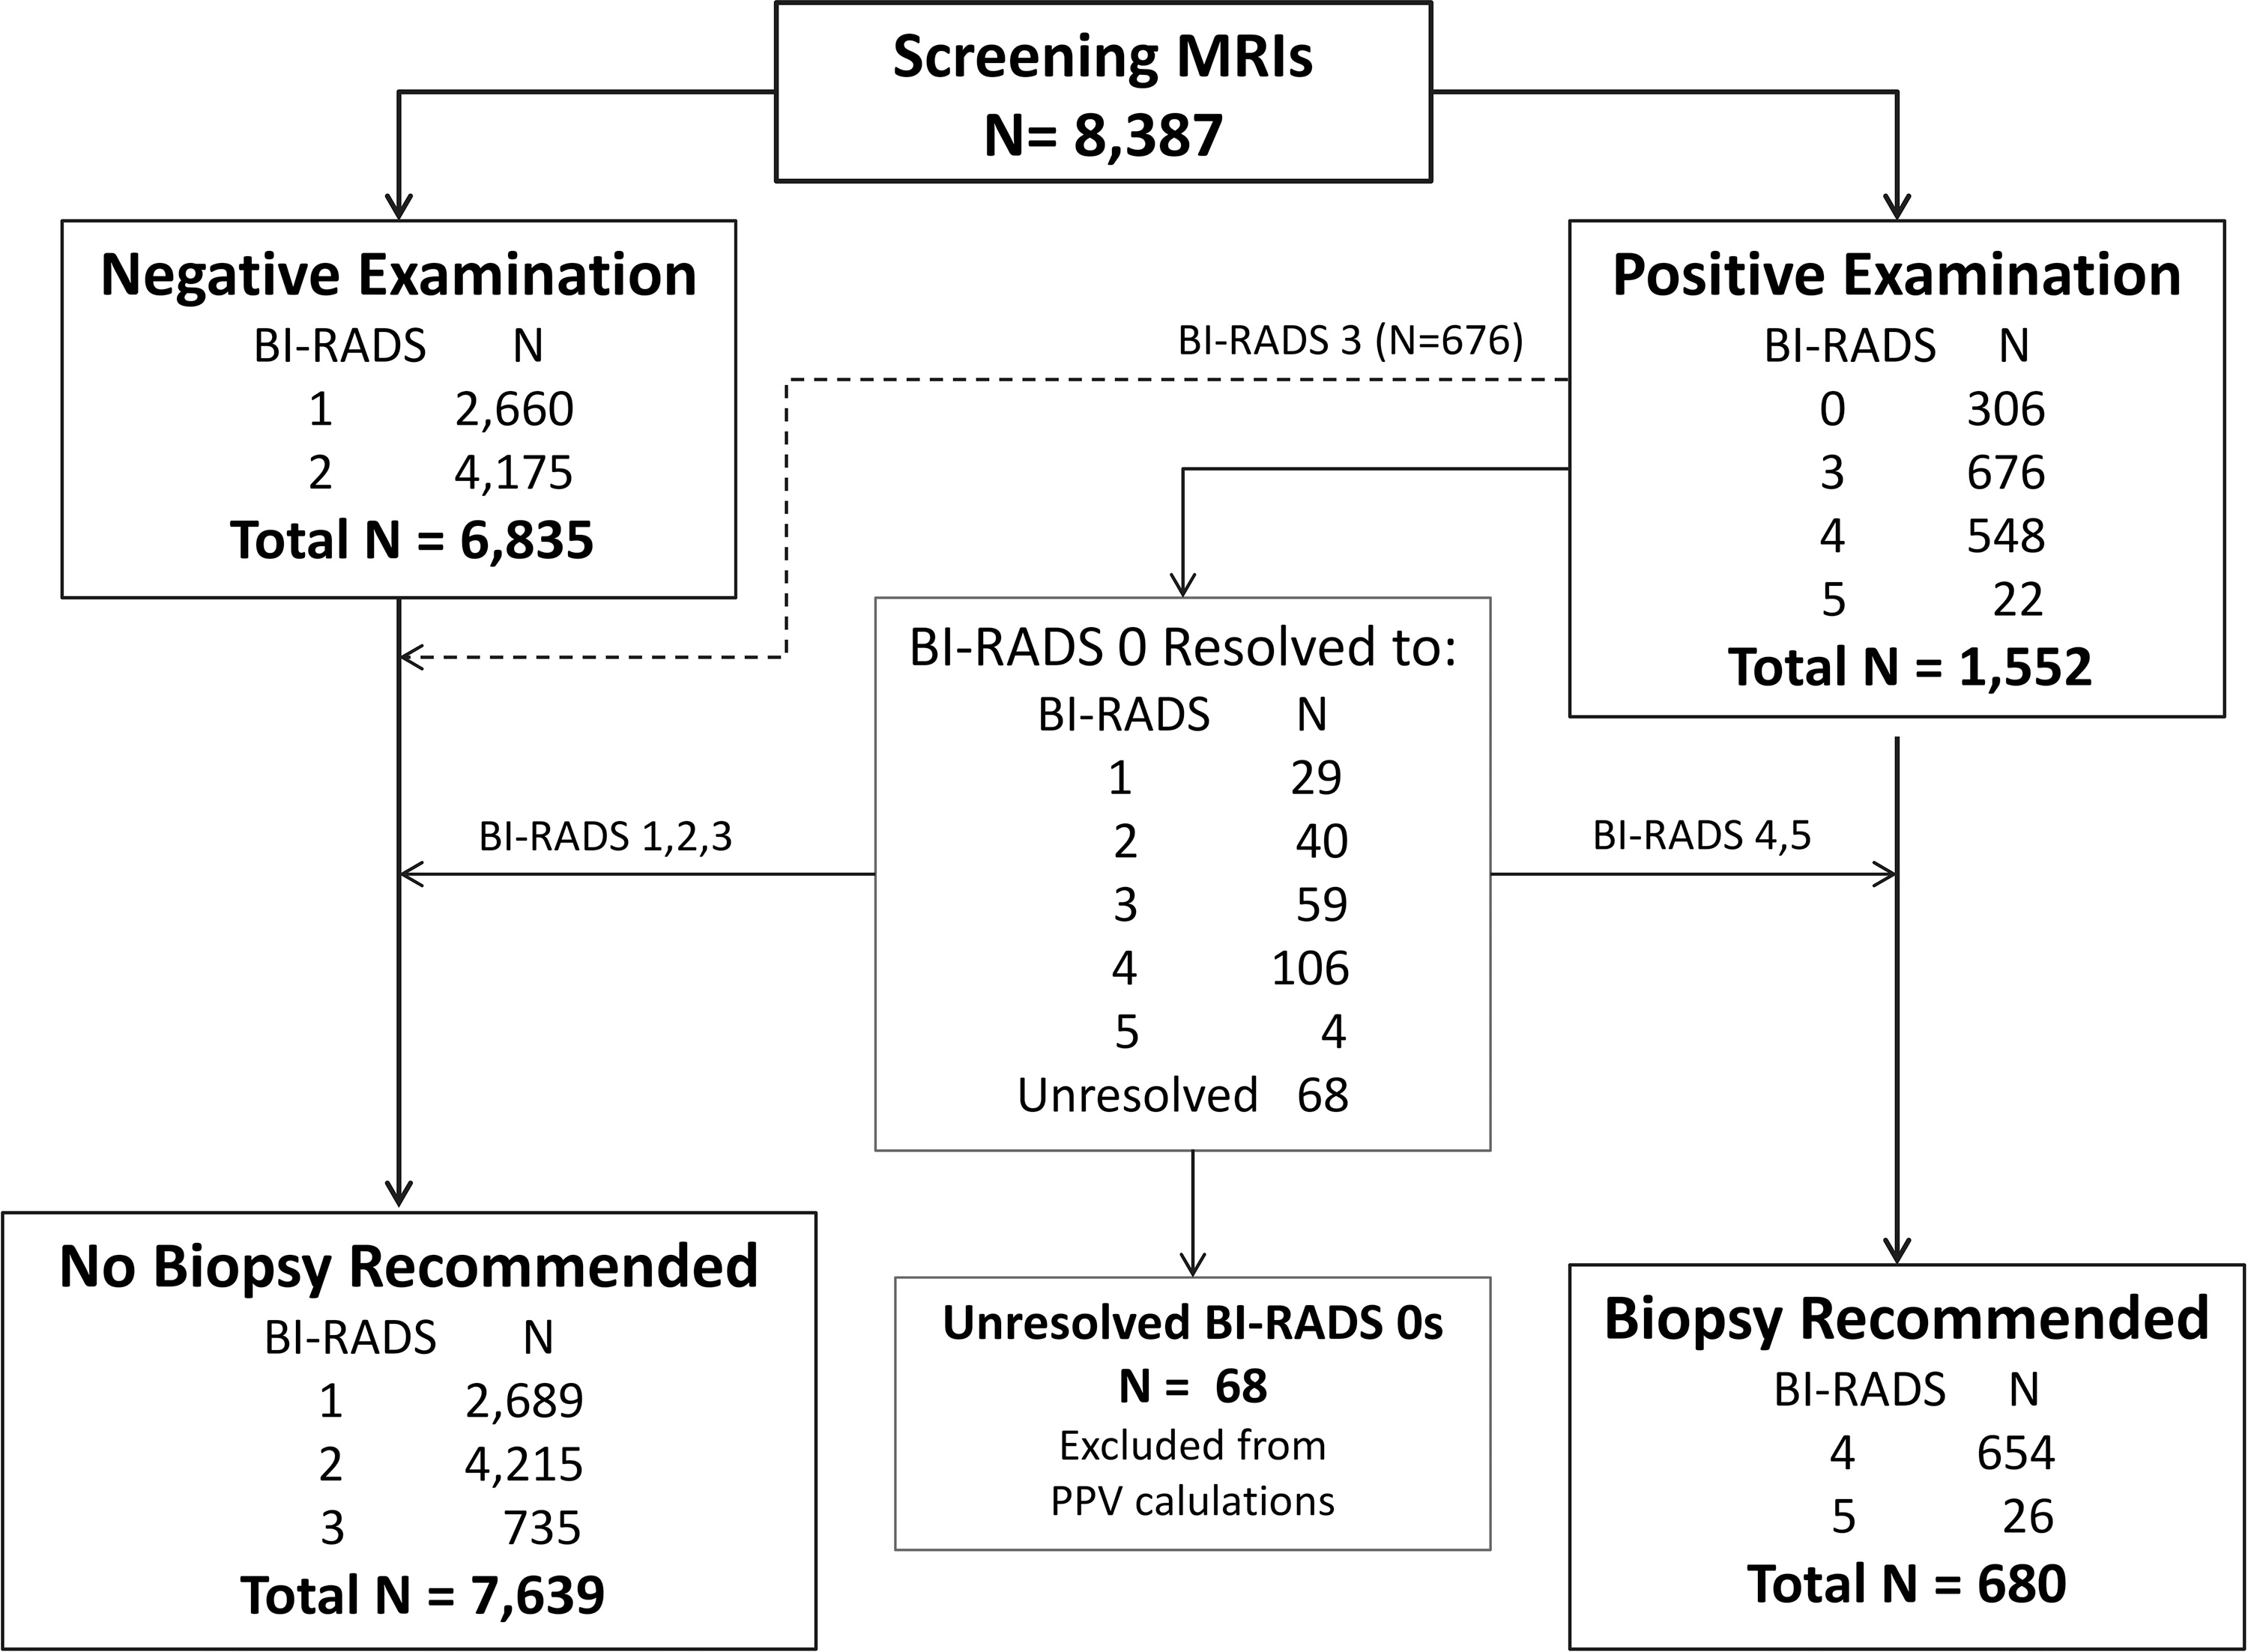 BI-RADS audit flowchart. CDR, sensitivity, and specificity were calculated on the basis of positive or negative examination results. PPV2 and PPV3 were calculated on the basis of whether biopsy was recommended. Unresolved BI-RADS category 0 examinations were excluded from PPV calculations.